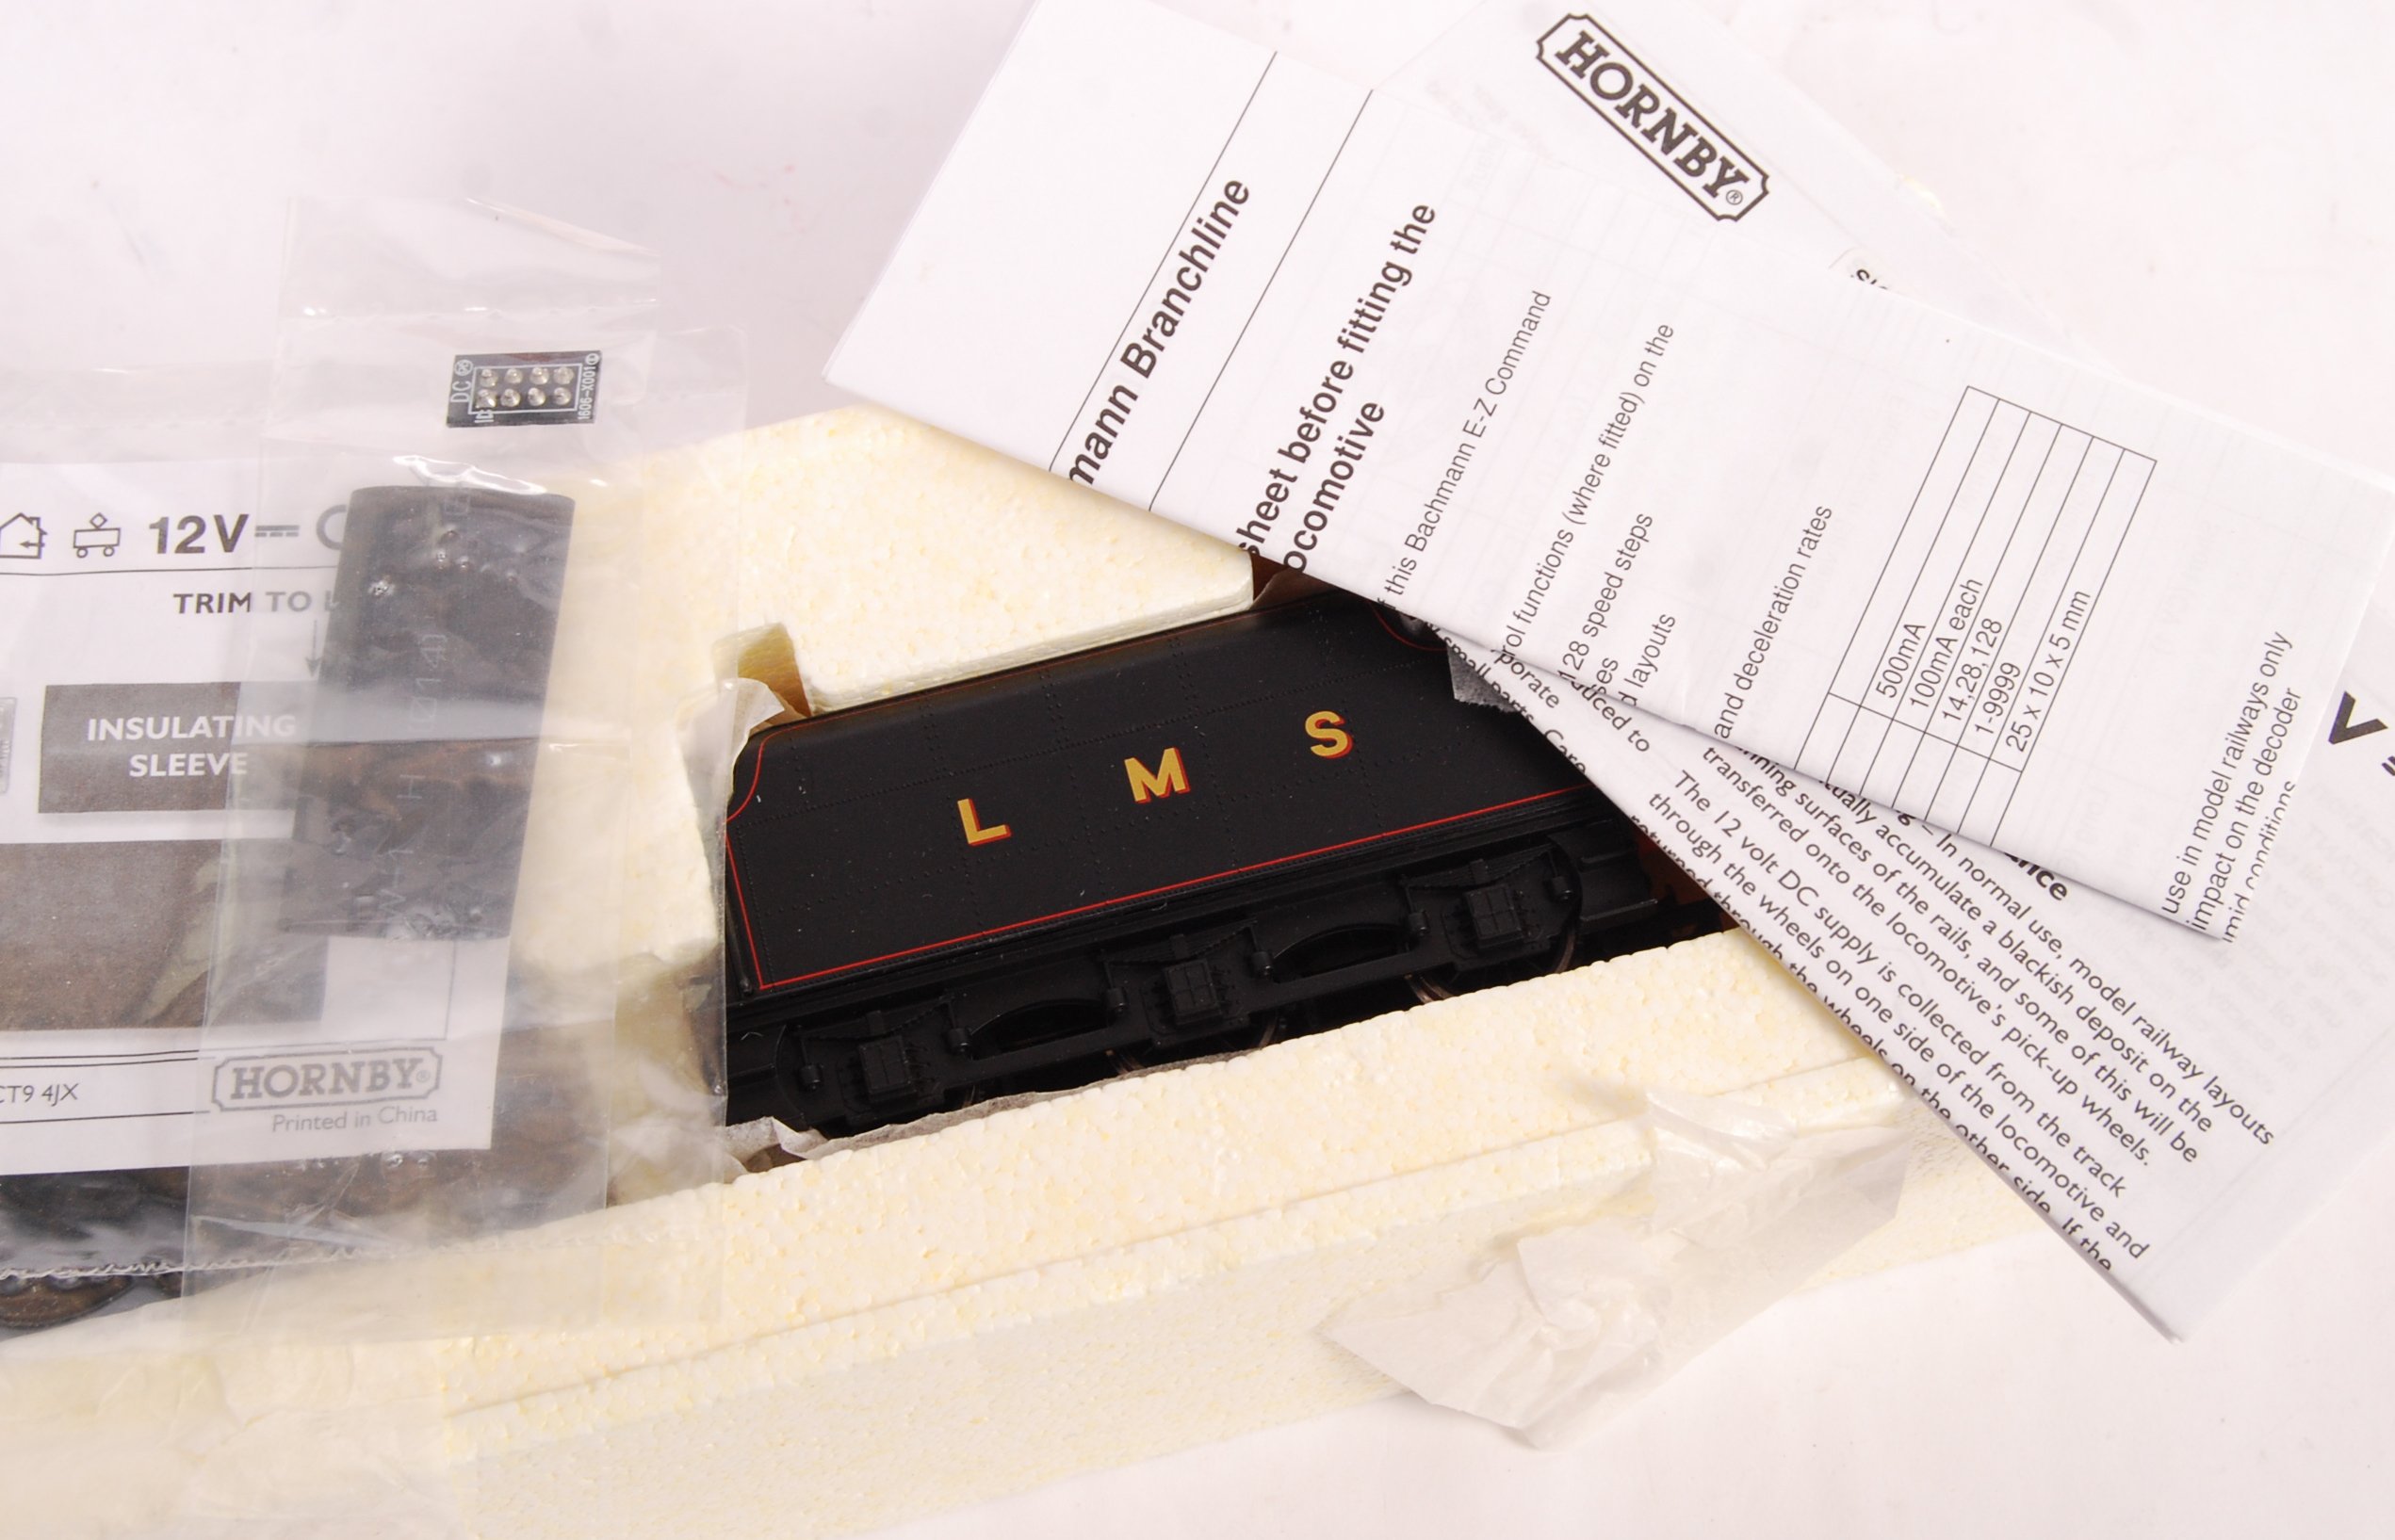 HORNBY SUPER DETAIL DCC READY 00 GAUGE BOXED RAILW - Image 3 of 3